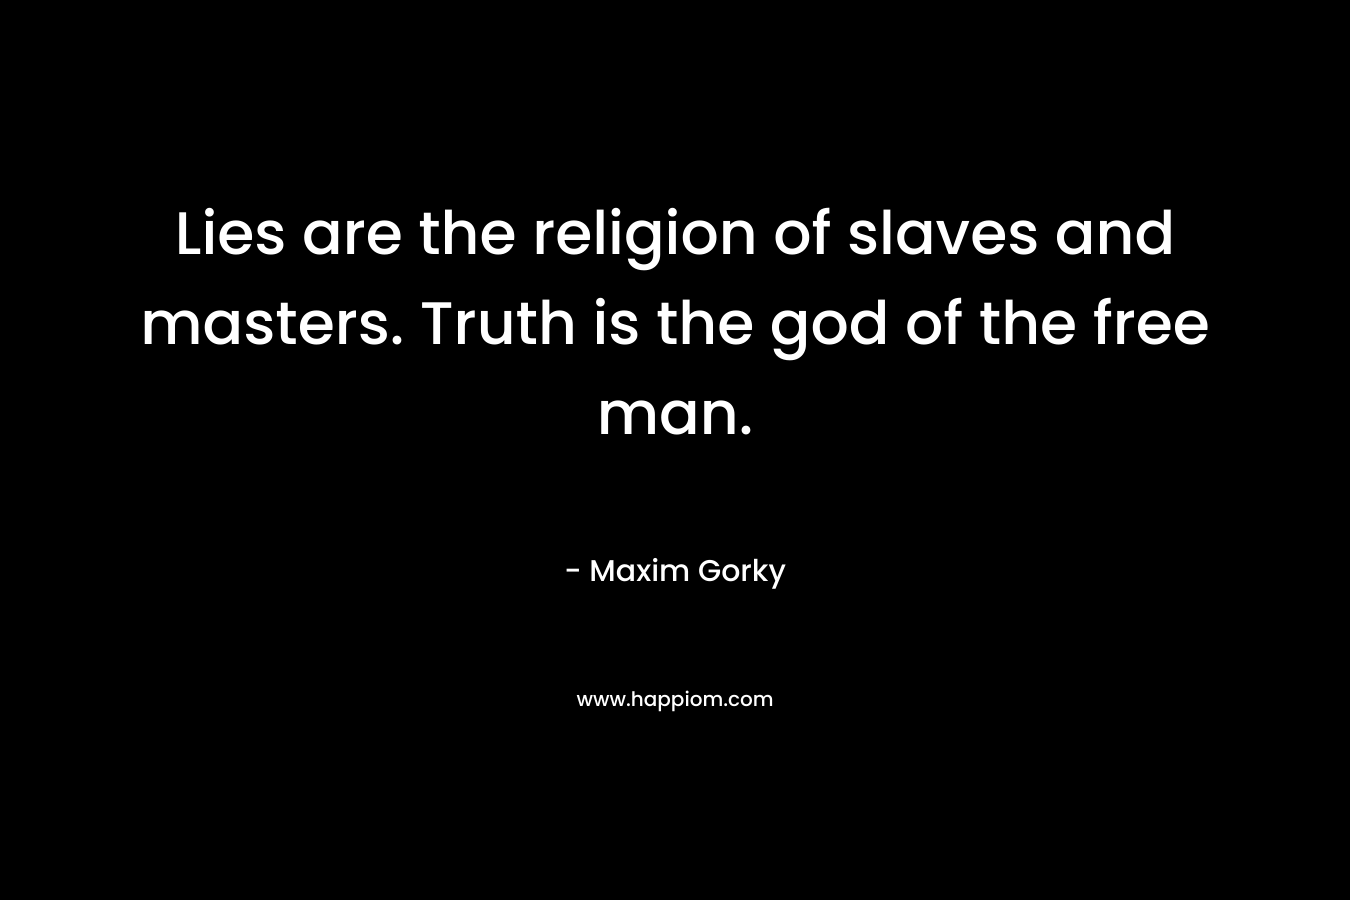 Lies are the religion of slaves and masters. Truth is the god of the free man.